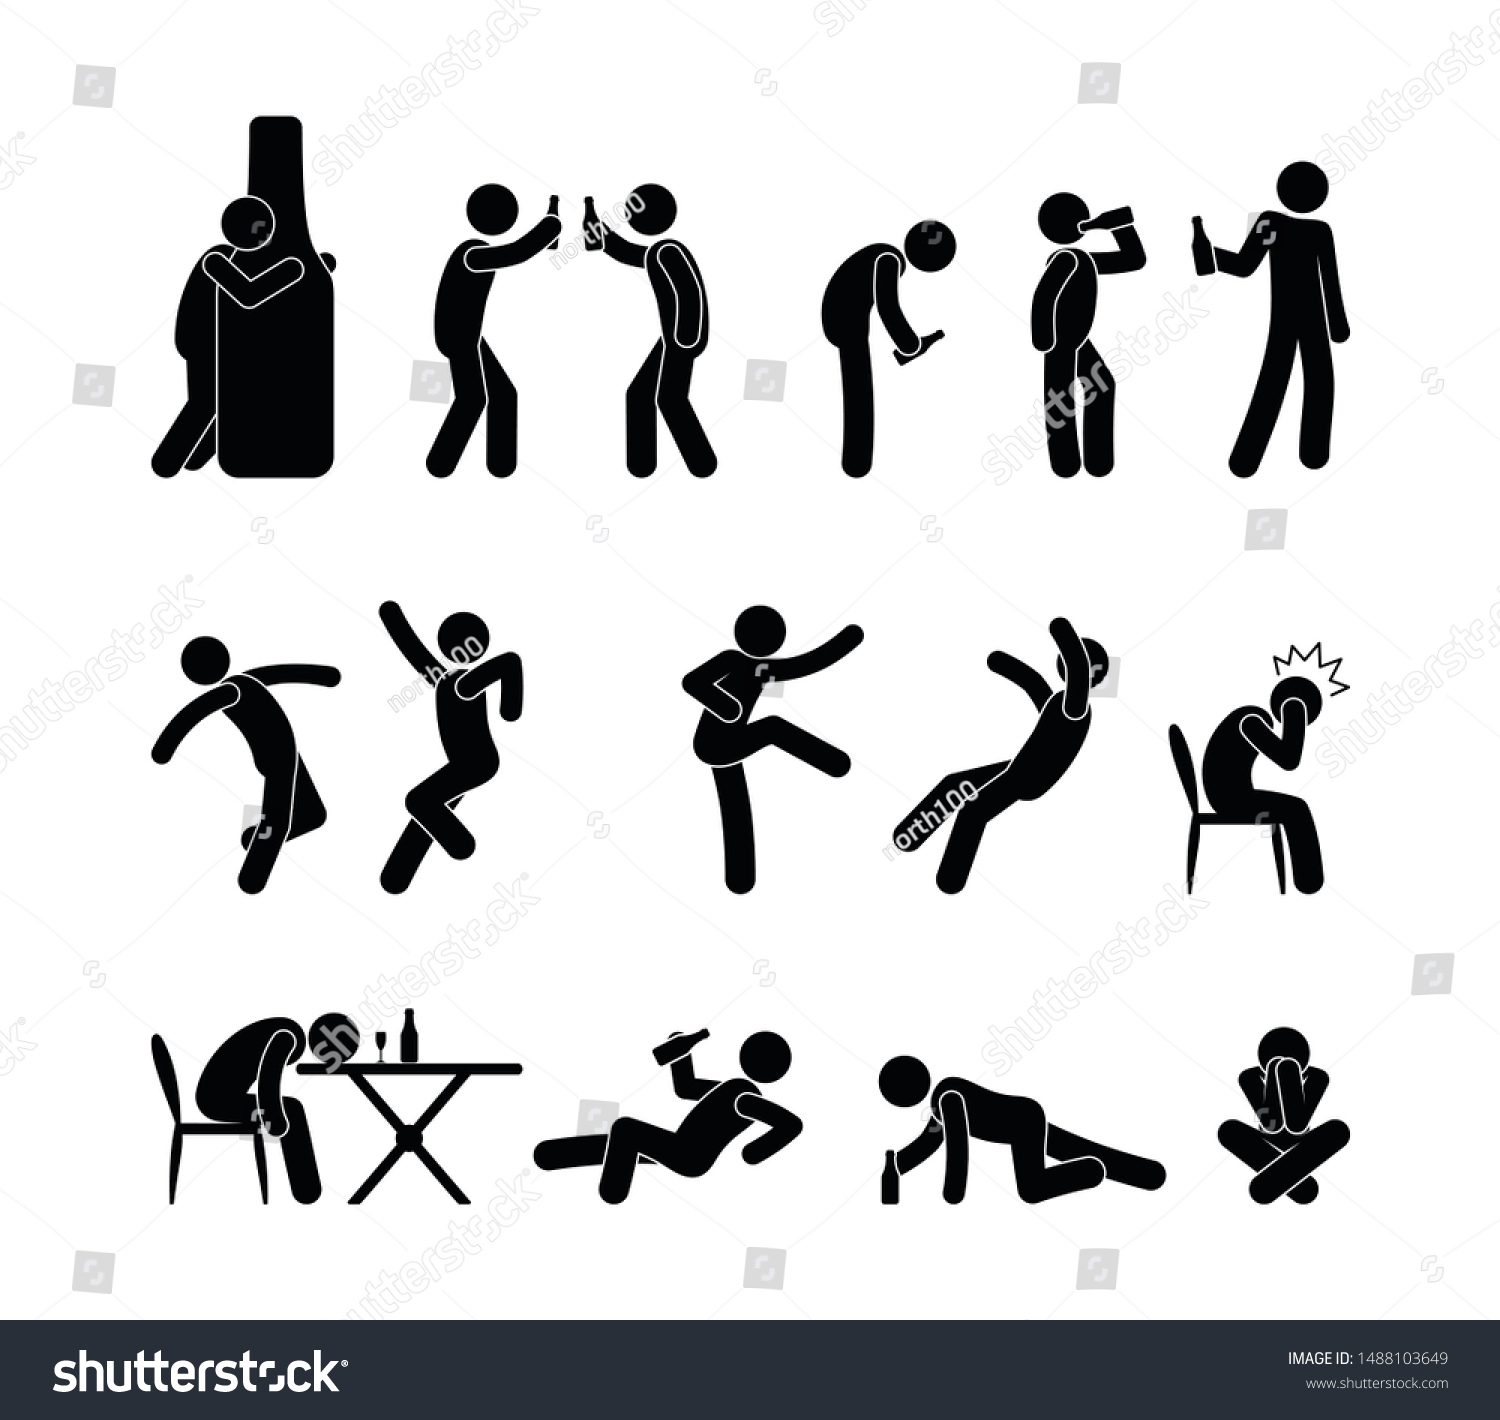 SVG of Drunk people in different situations. Cocktail party people drink alcohol. A man drinks wine, beer. Sticks figure pictogram alcoholism. svg